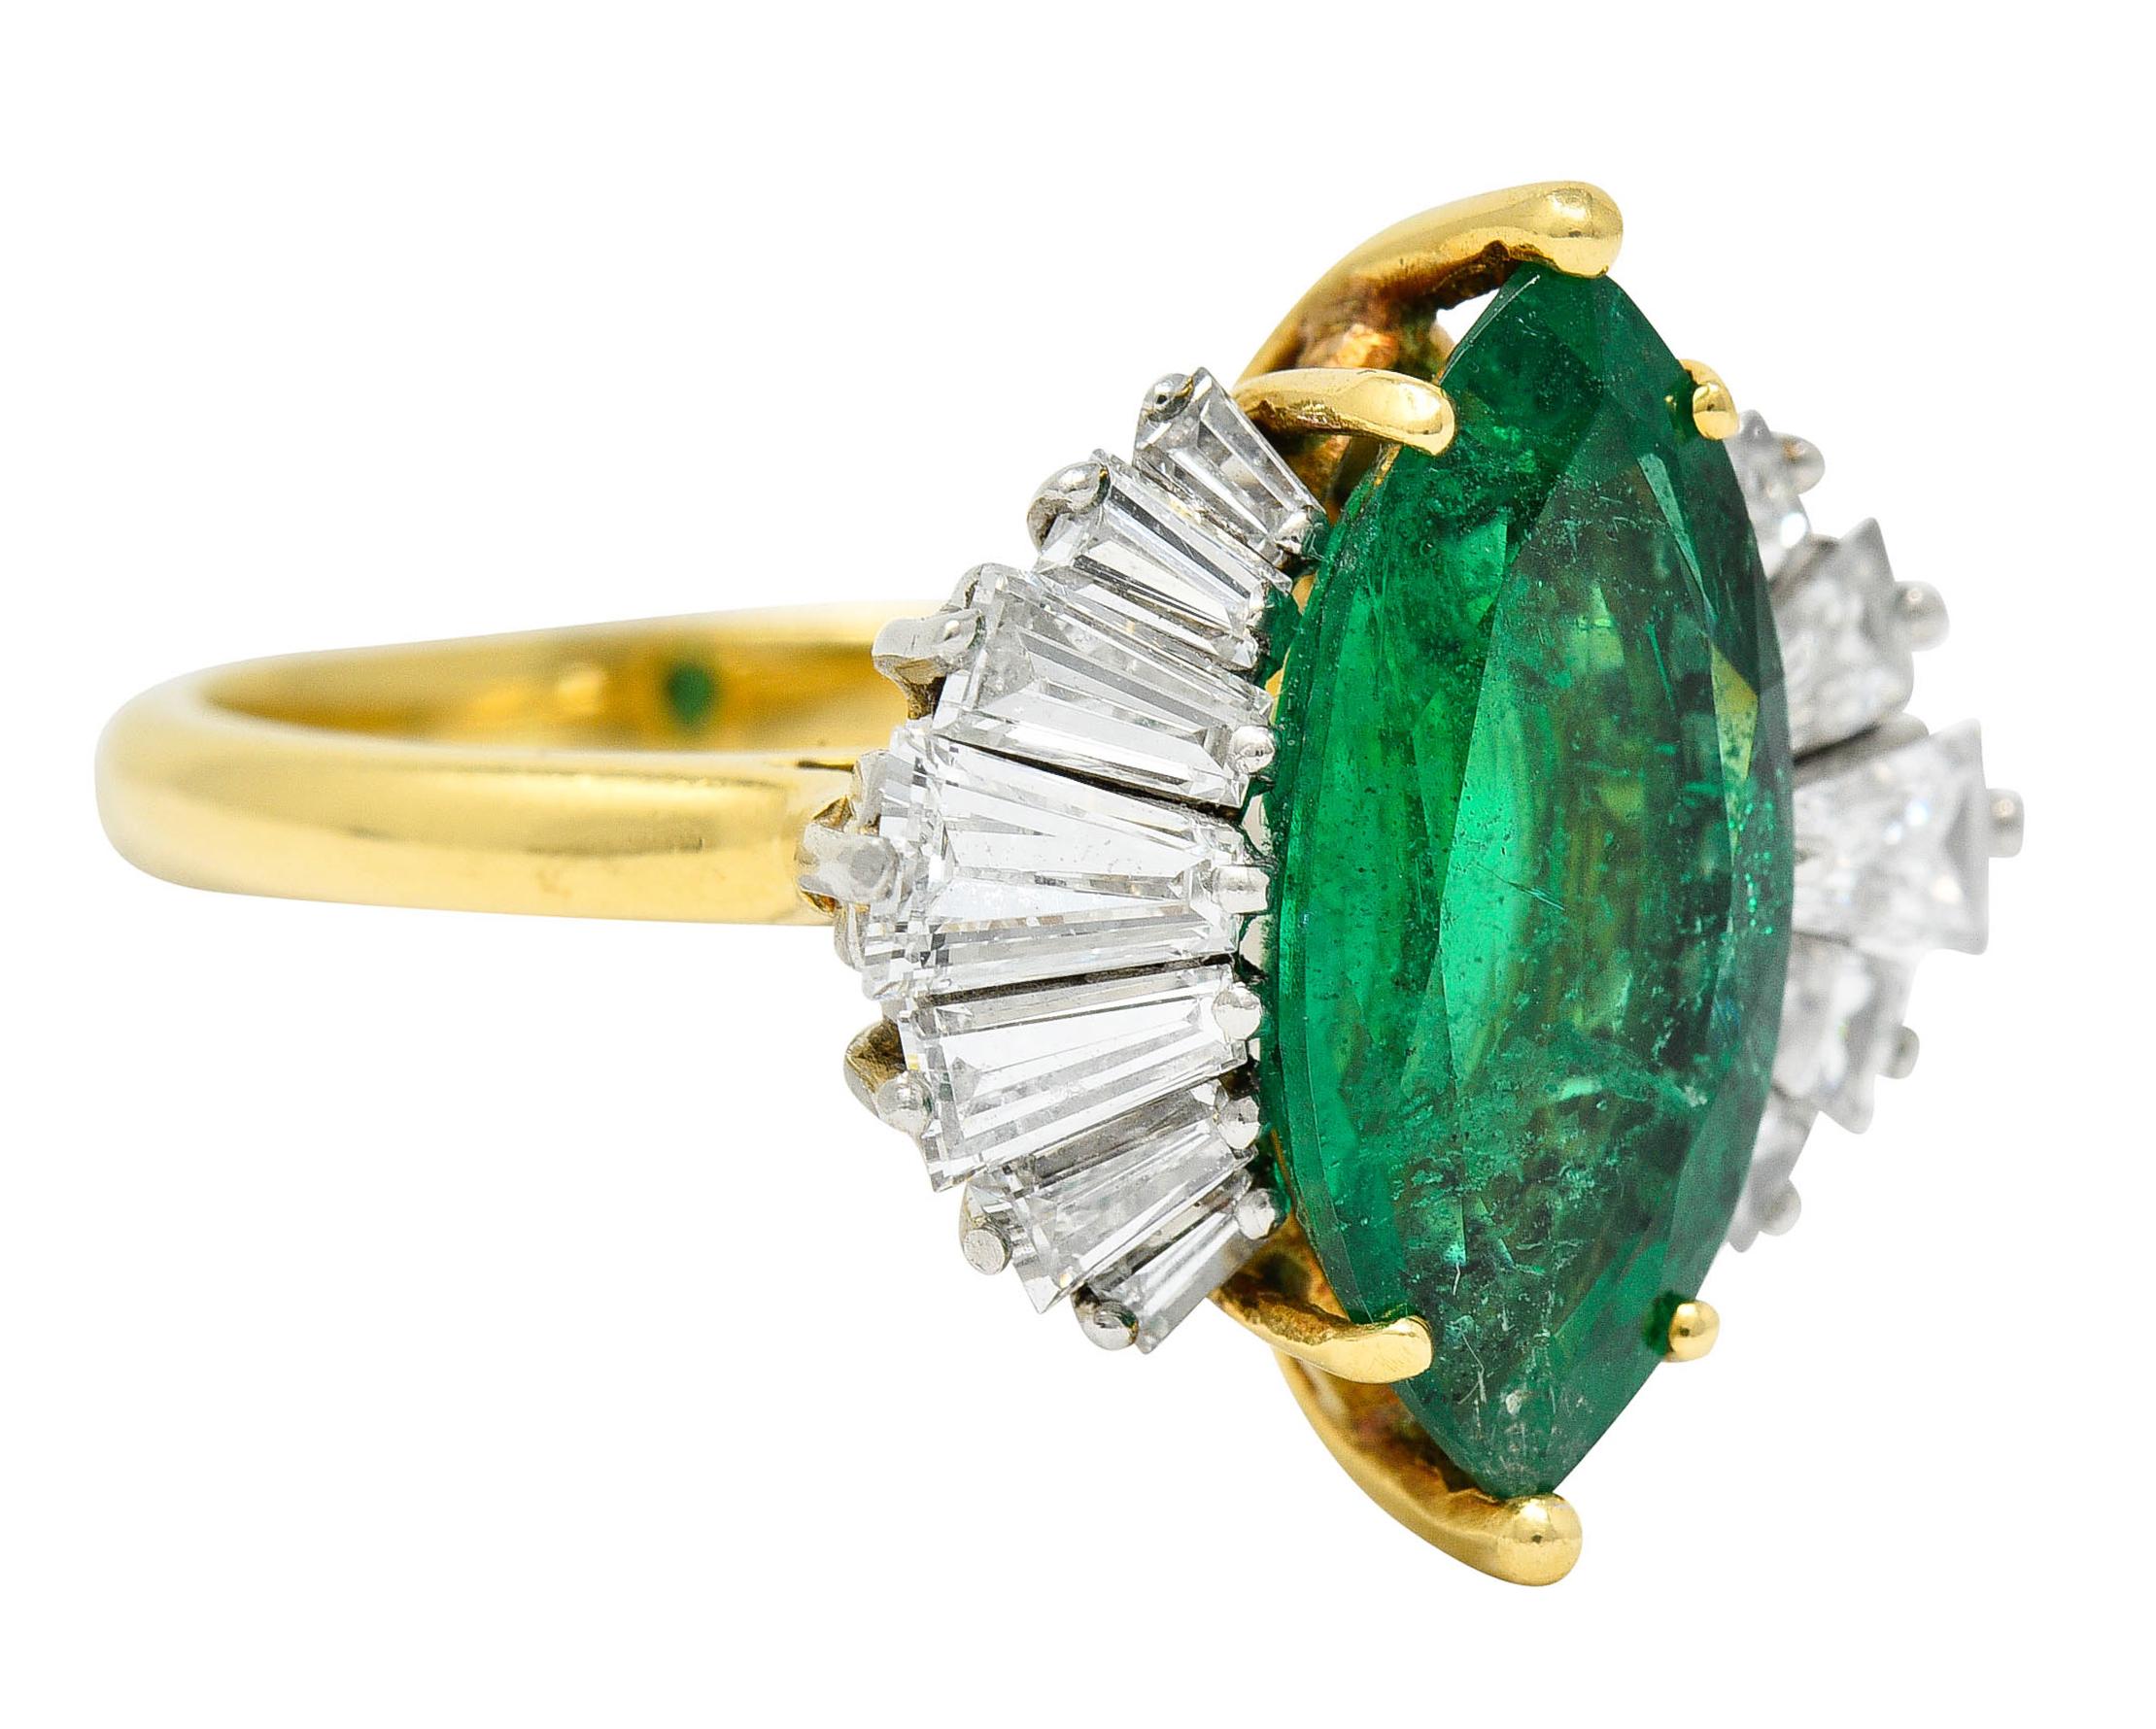 Centering a marquise cut Zambian emerald that weighs approximately 2.45 carats

Semi-transparent and bright green in color with moderate clarity enhancement (F2)

Flanked by a half halo of tapered baguette cut diamonds, set in platinum

Weighing in